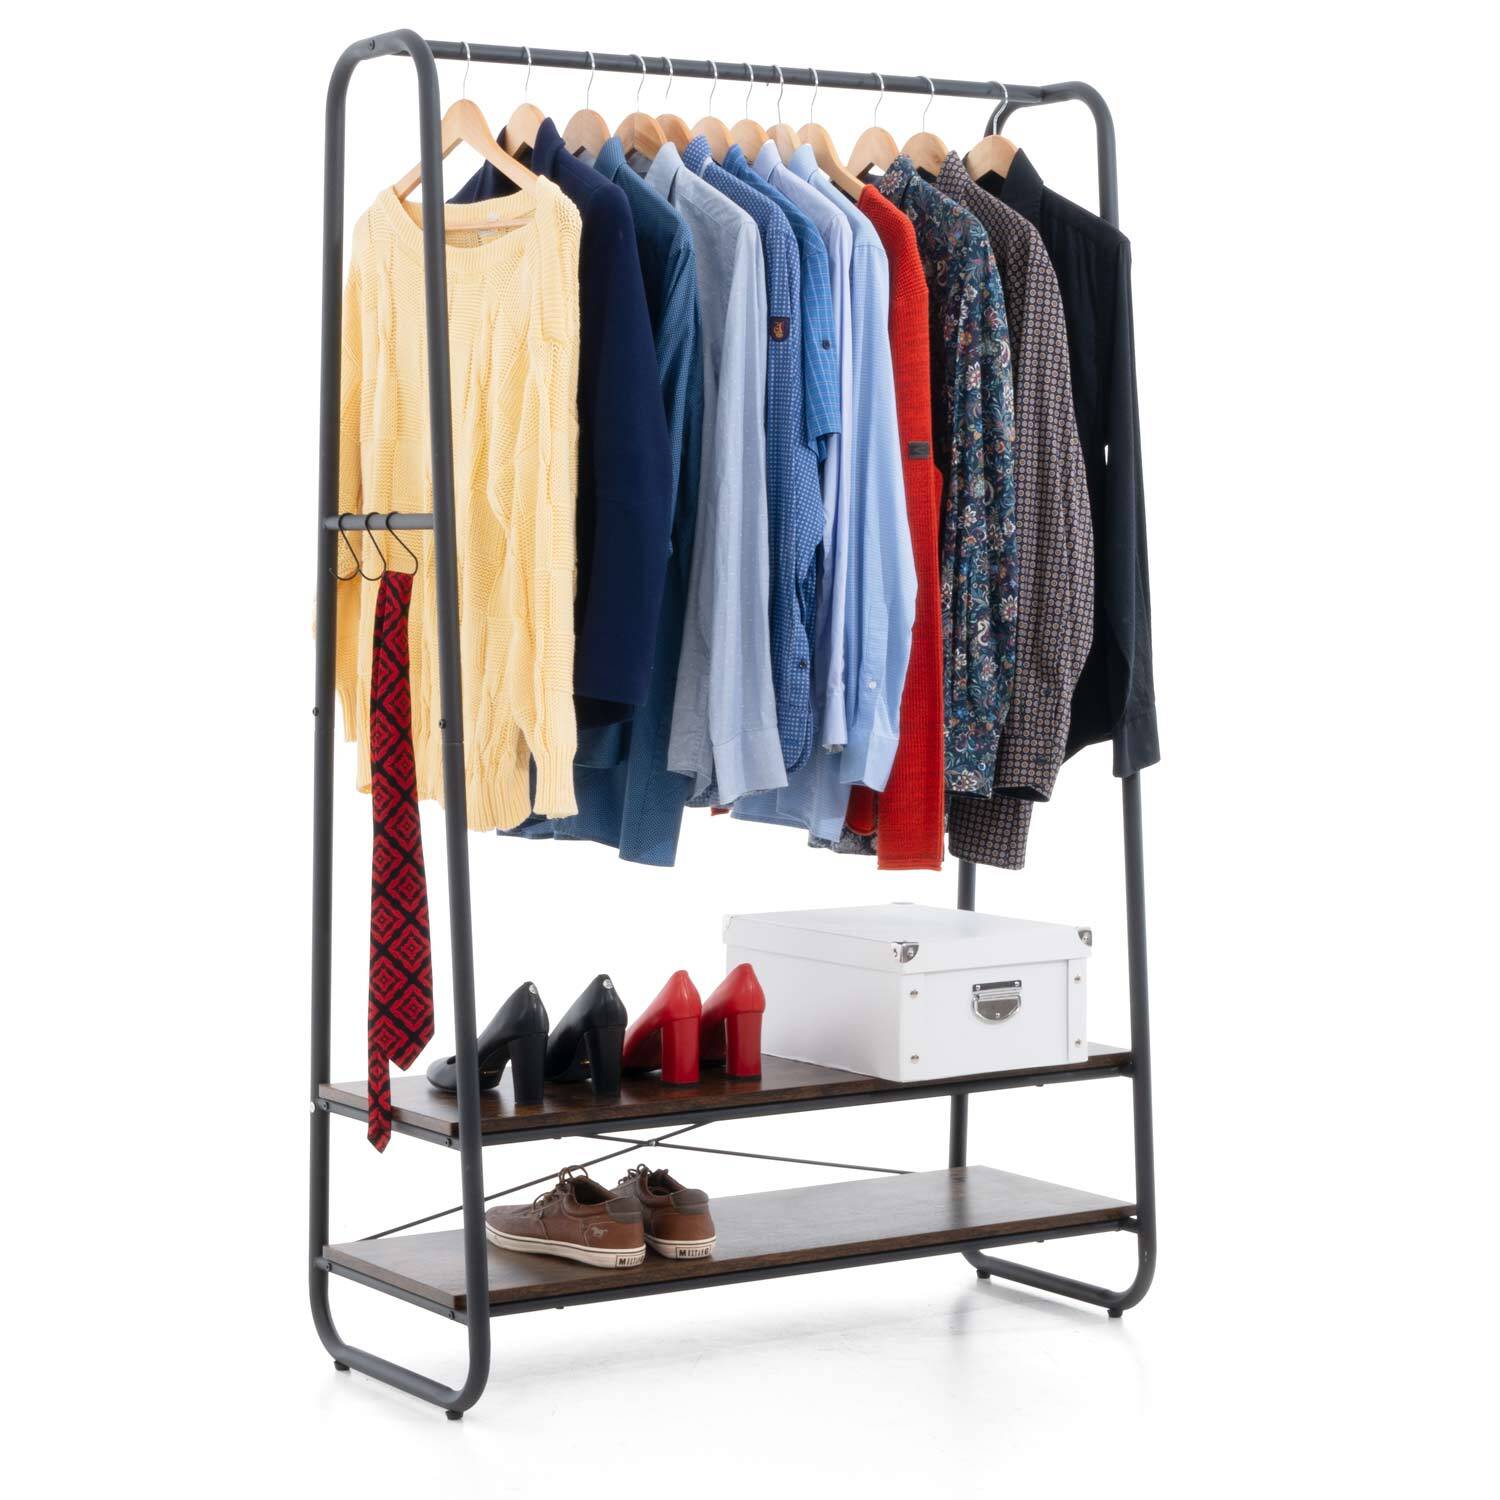 Heavy Duty Clothes Rail, Clothes Rail with 2 Shelves, 170 kg Load Capacity, Particleboard Rustic Brown, Tatkraft Anneli, 2